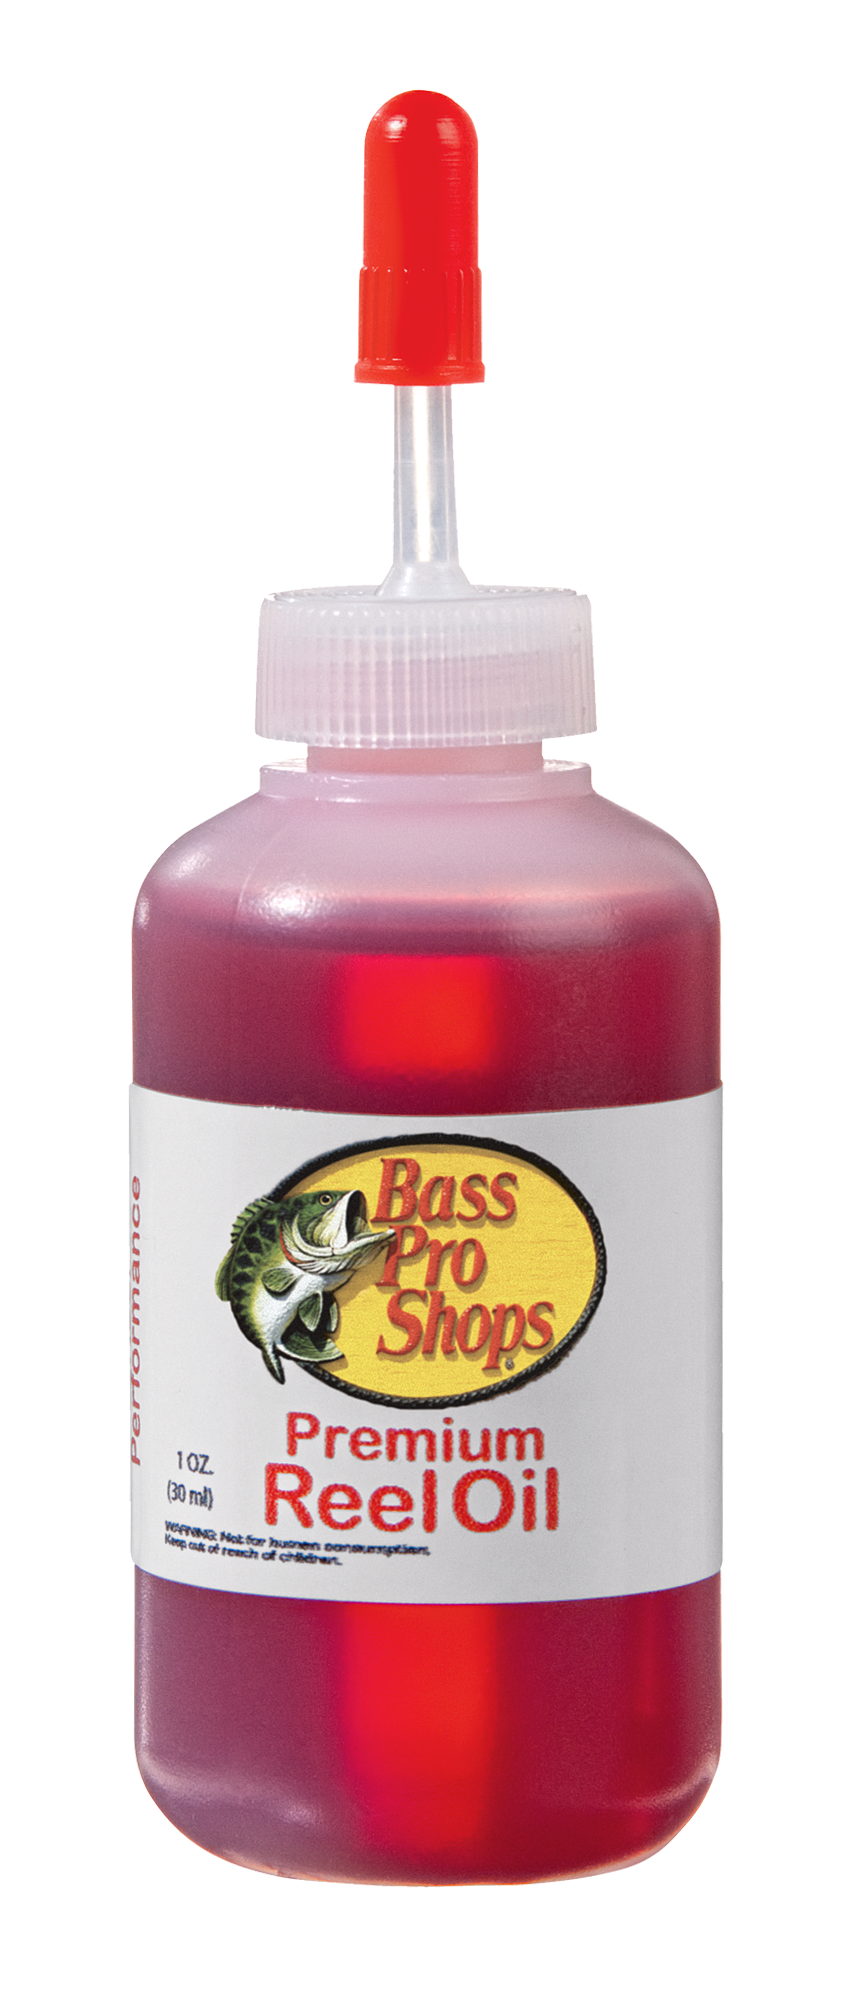 Buy Grease And Oil For Fishing Reel online